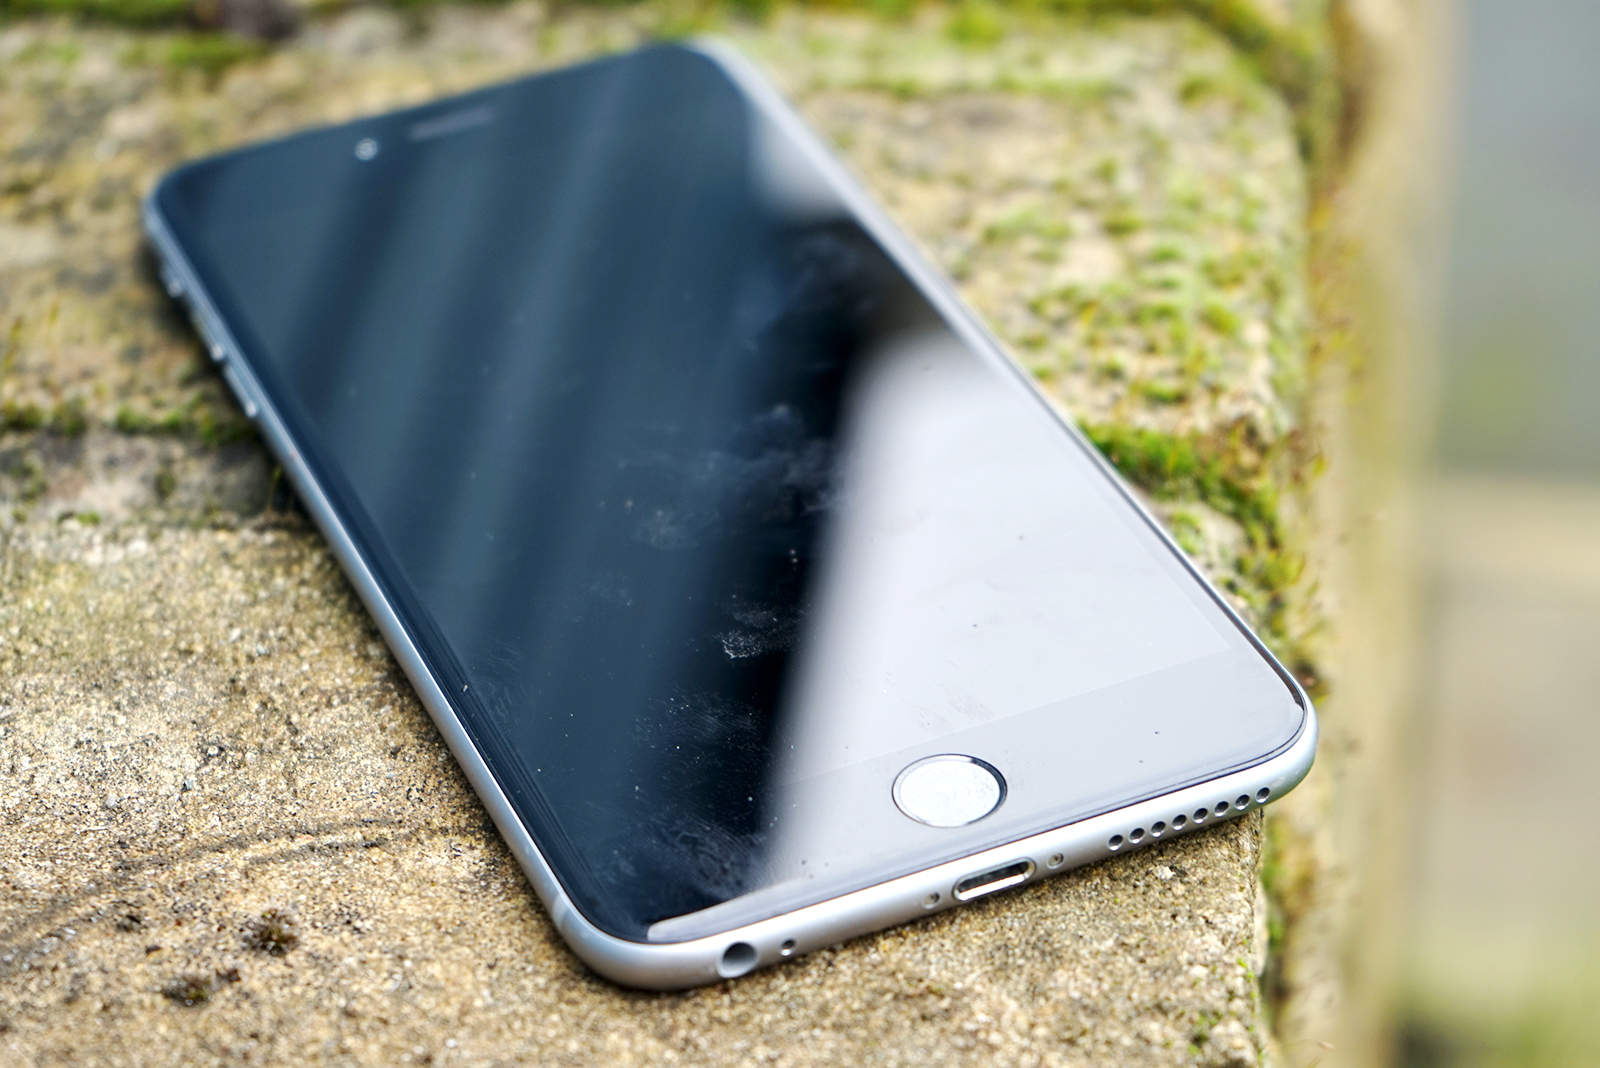 The iPhone 6 Plus was Apple's biggest phone yet.